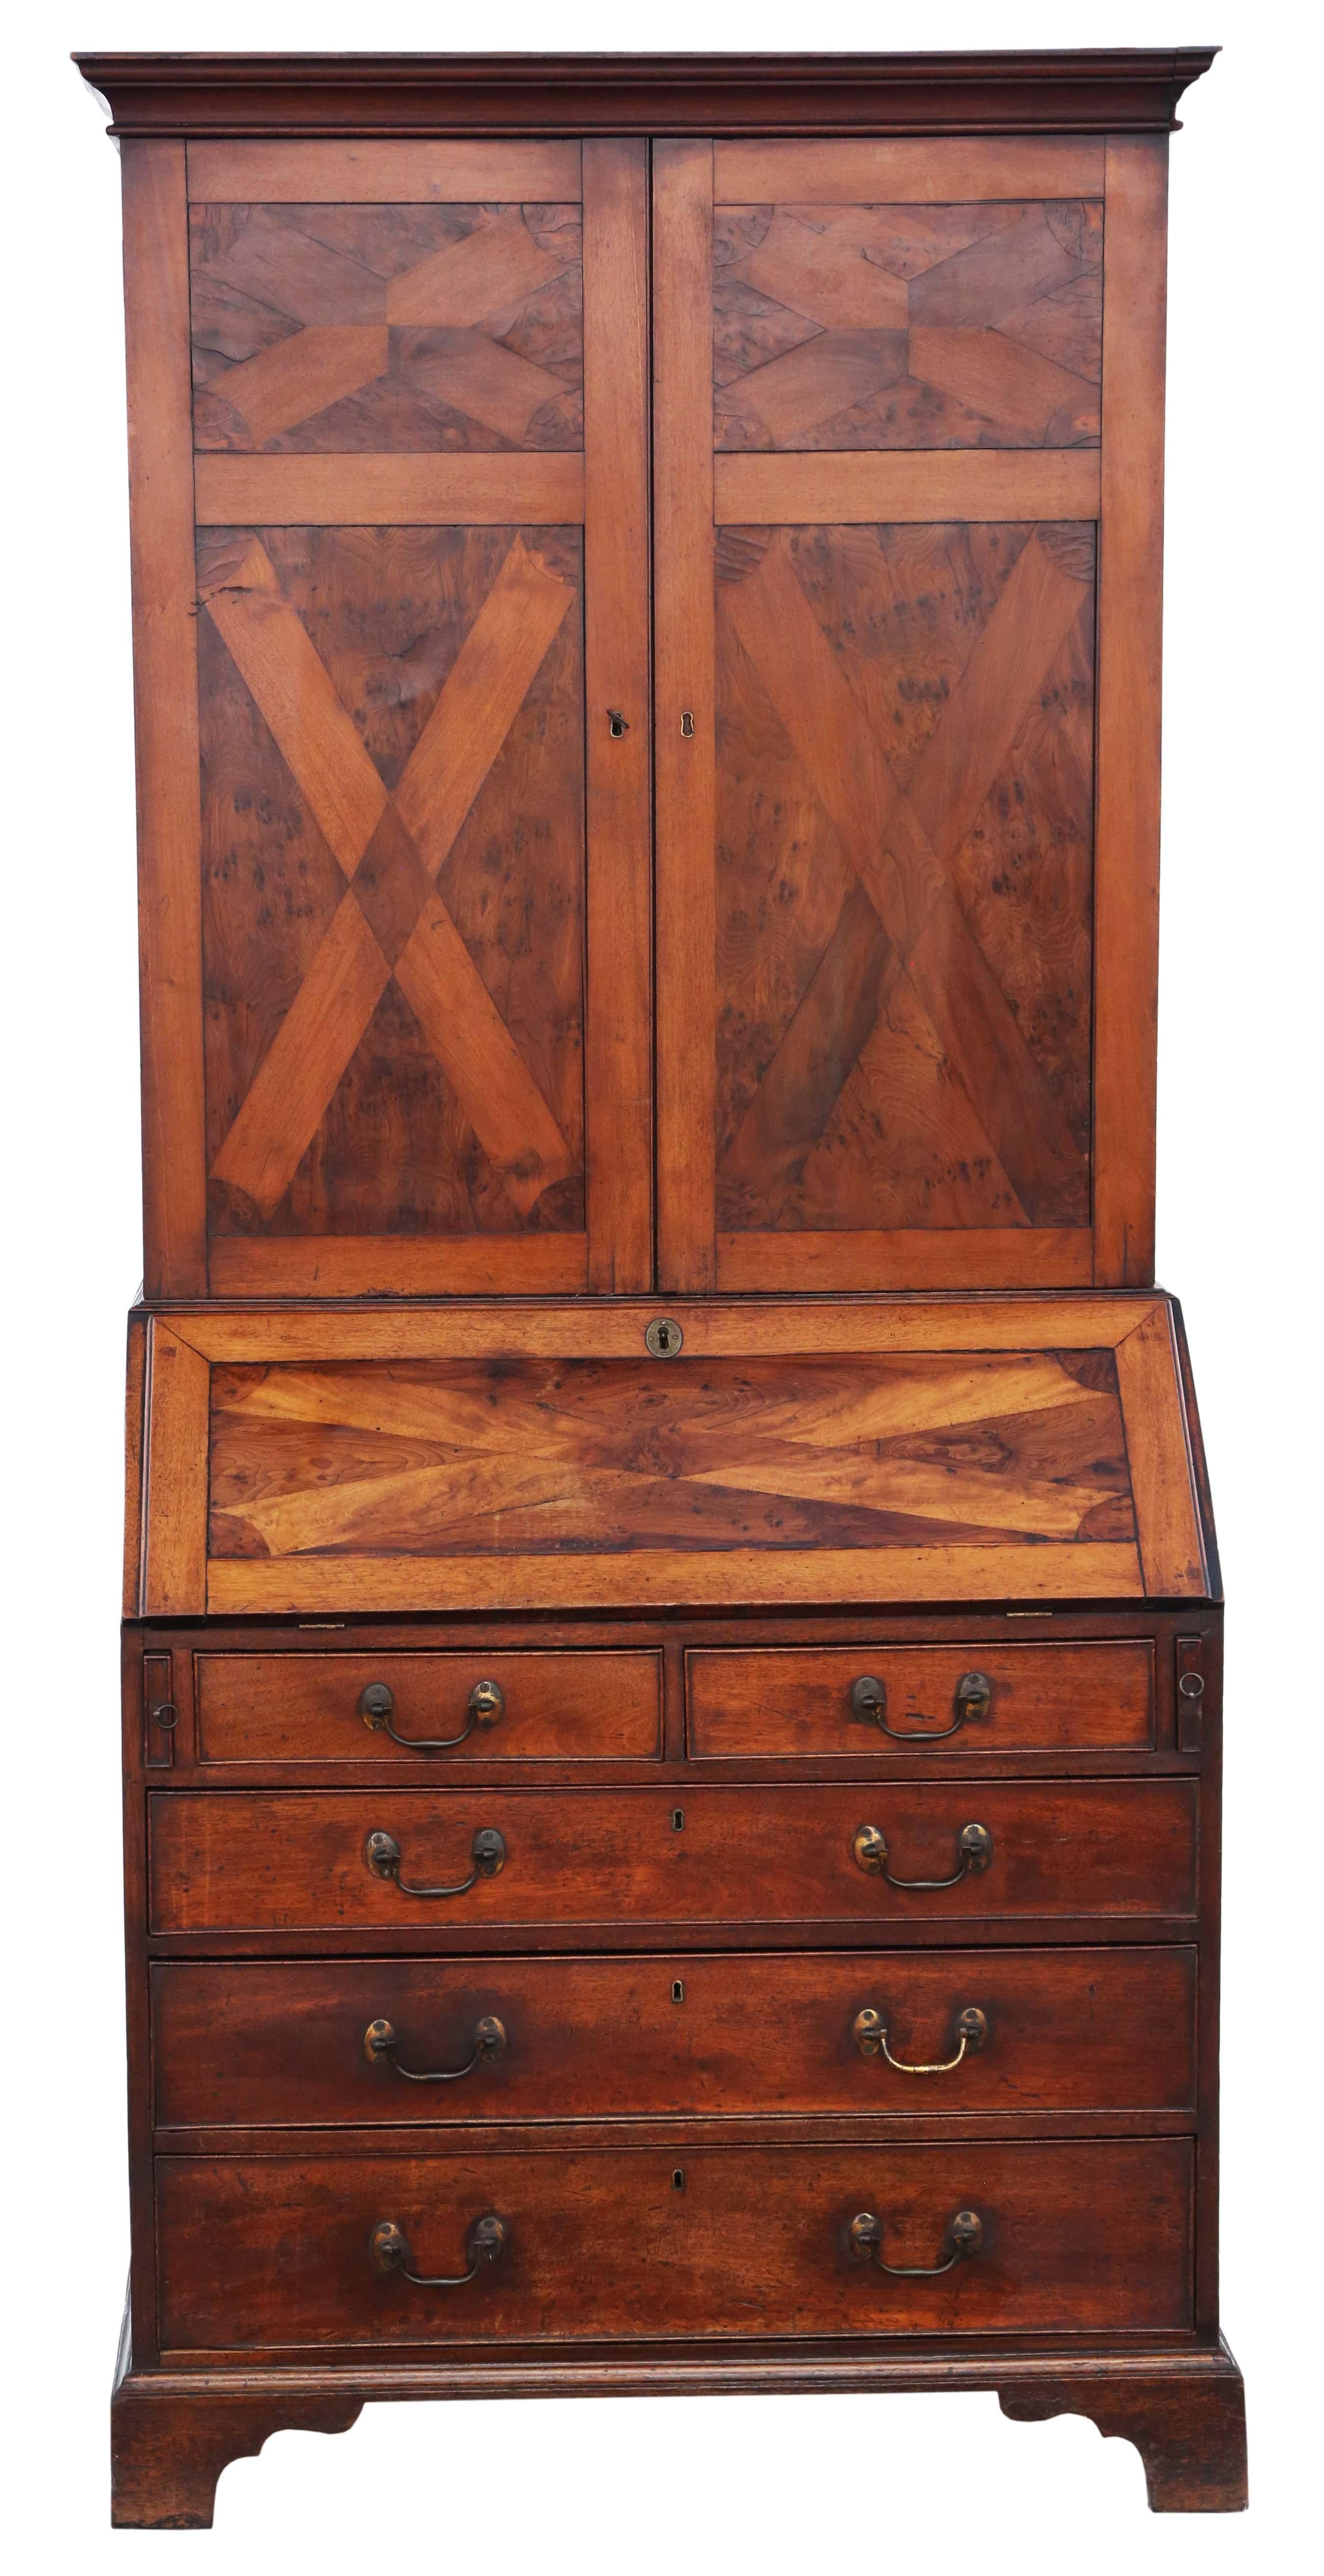 Antique quality Georgian C1800 yew, burr yew and mahogany housekeeper's bureau cupboard bookcase. Sometimes known as an estate cupboard. A wonderful rare quality period piece.

Solid and strong, with no loose joints. Full of age, character and